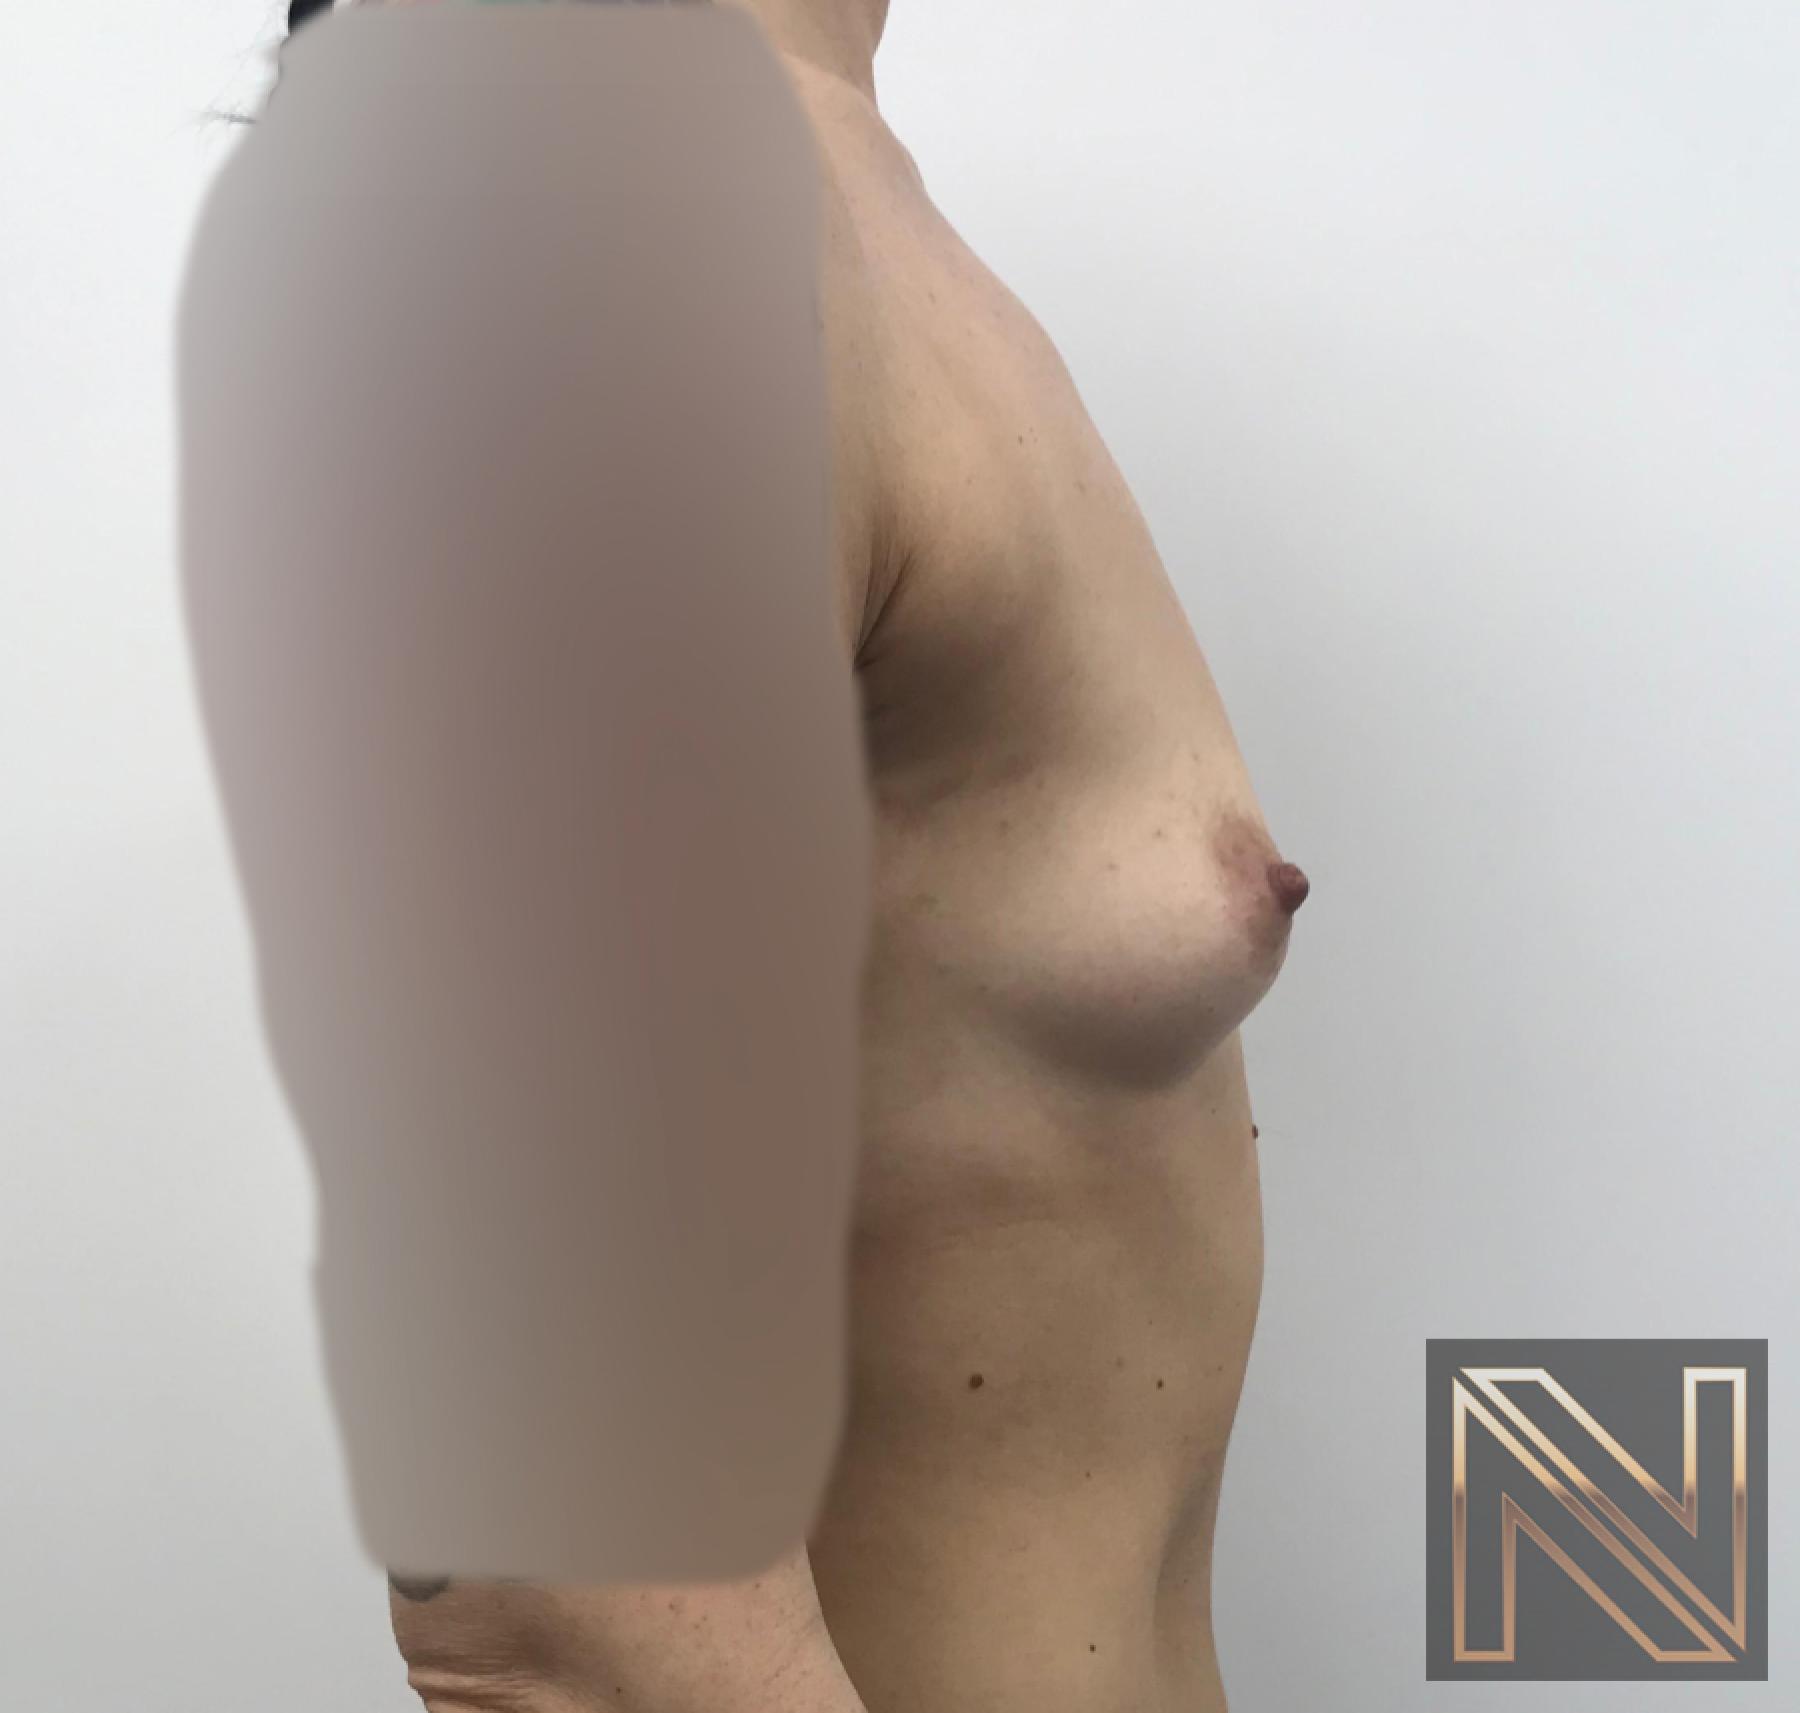 Breast Augmentation: Patient 2 - Before and After 3